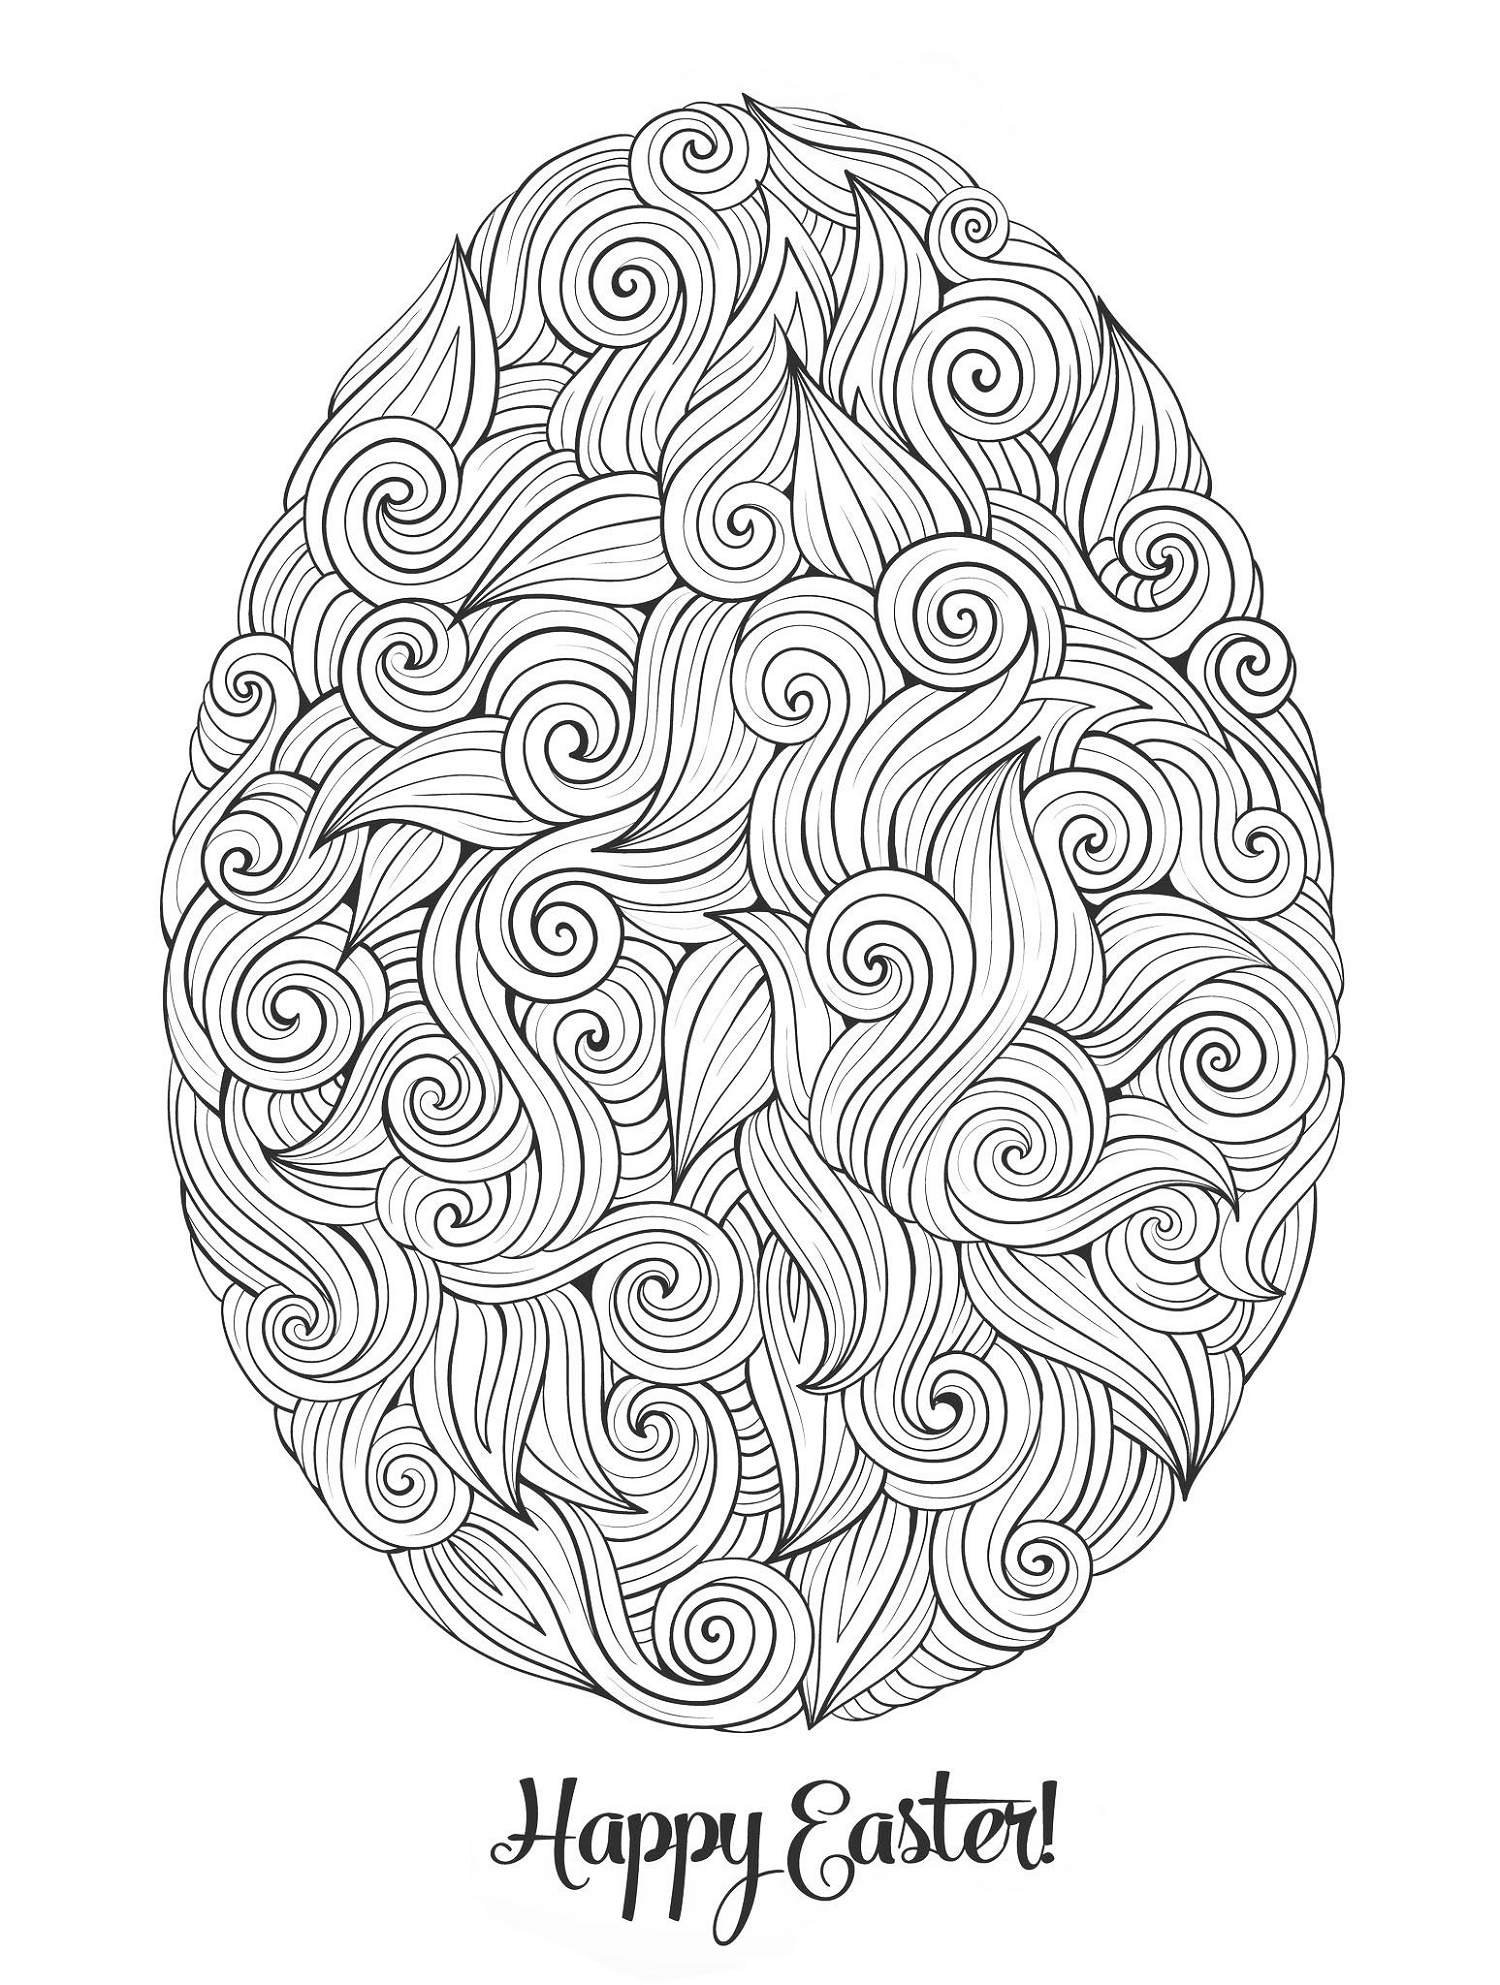 Easter Egg Coloring Ideas Pattern